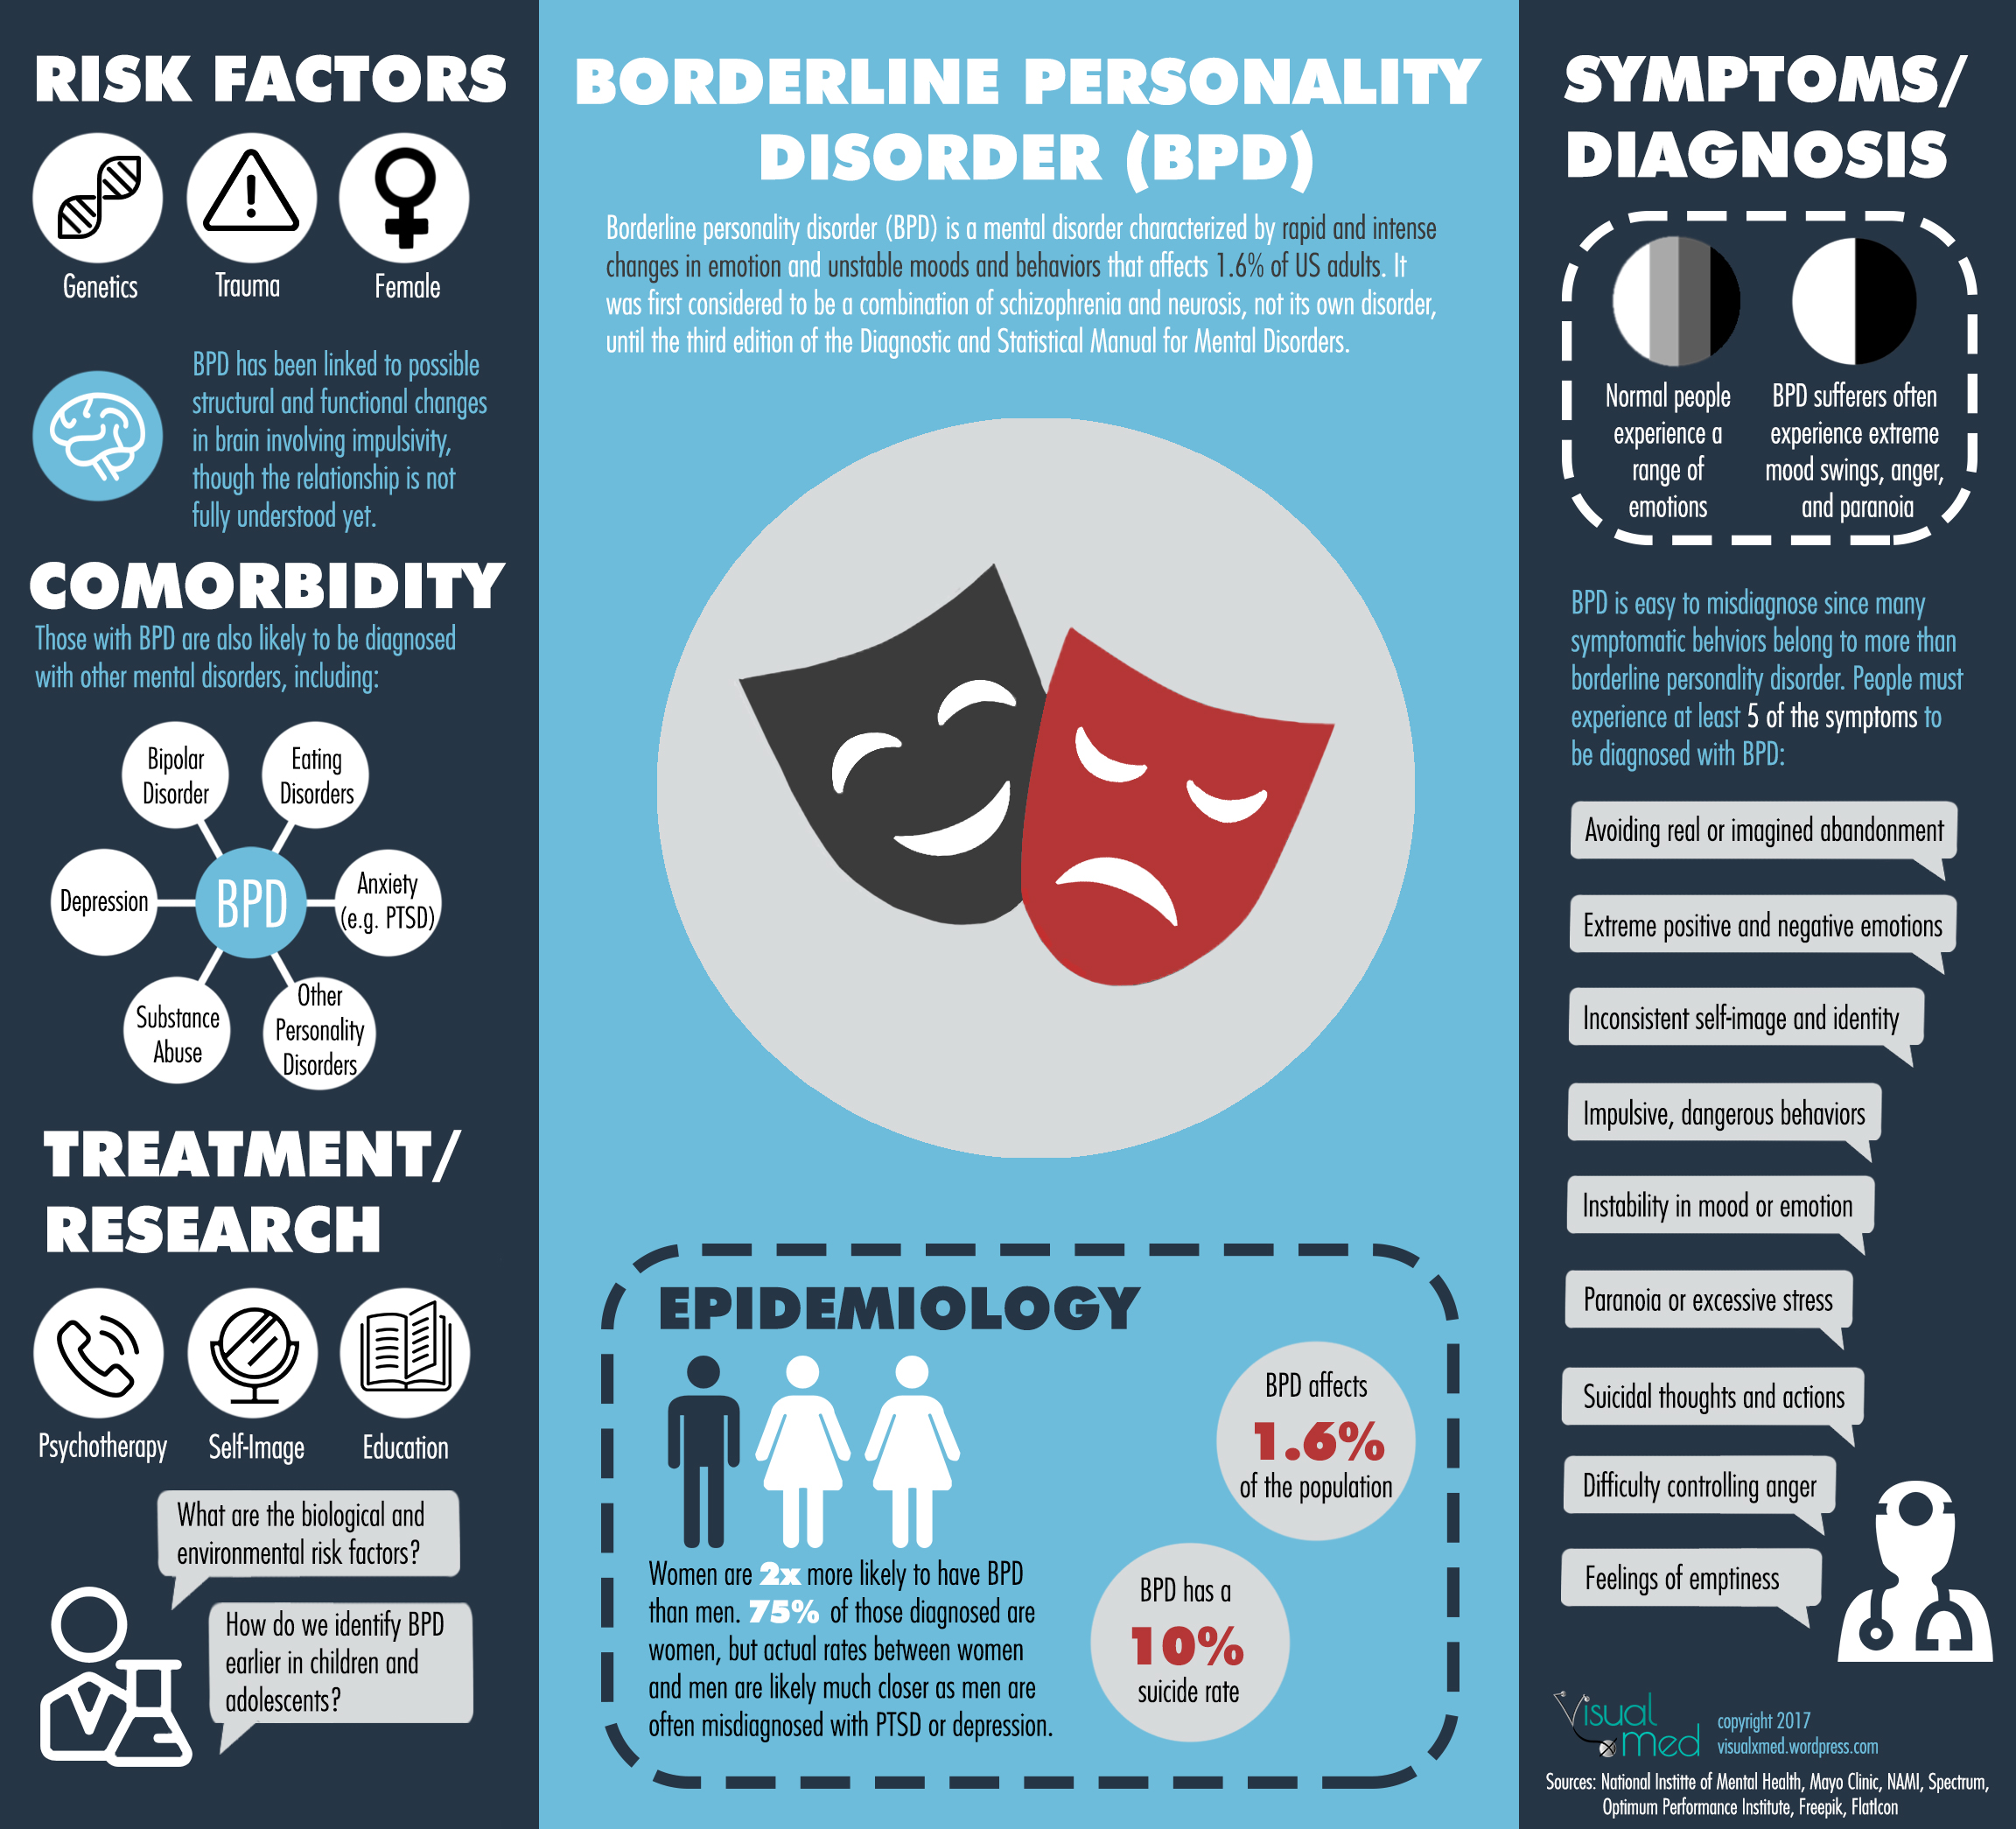 Borderline personality disorder: a personal story